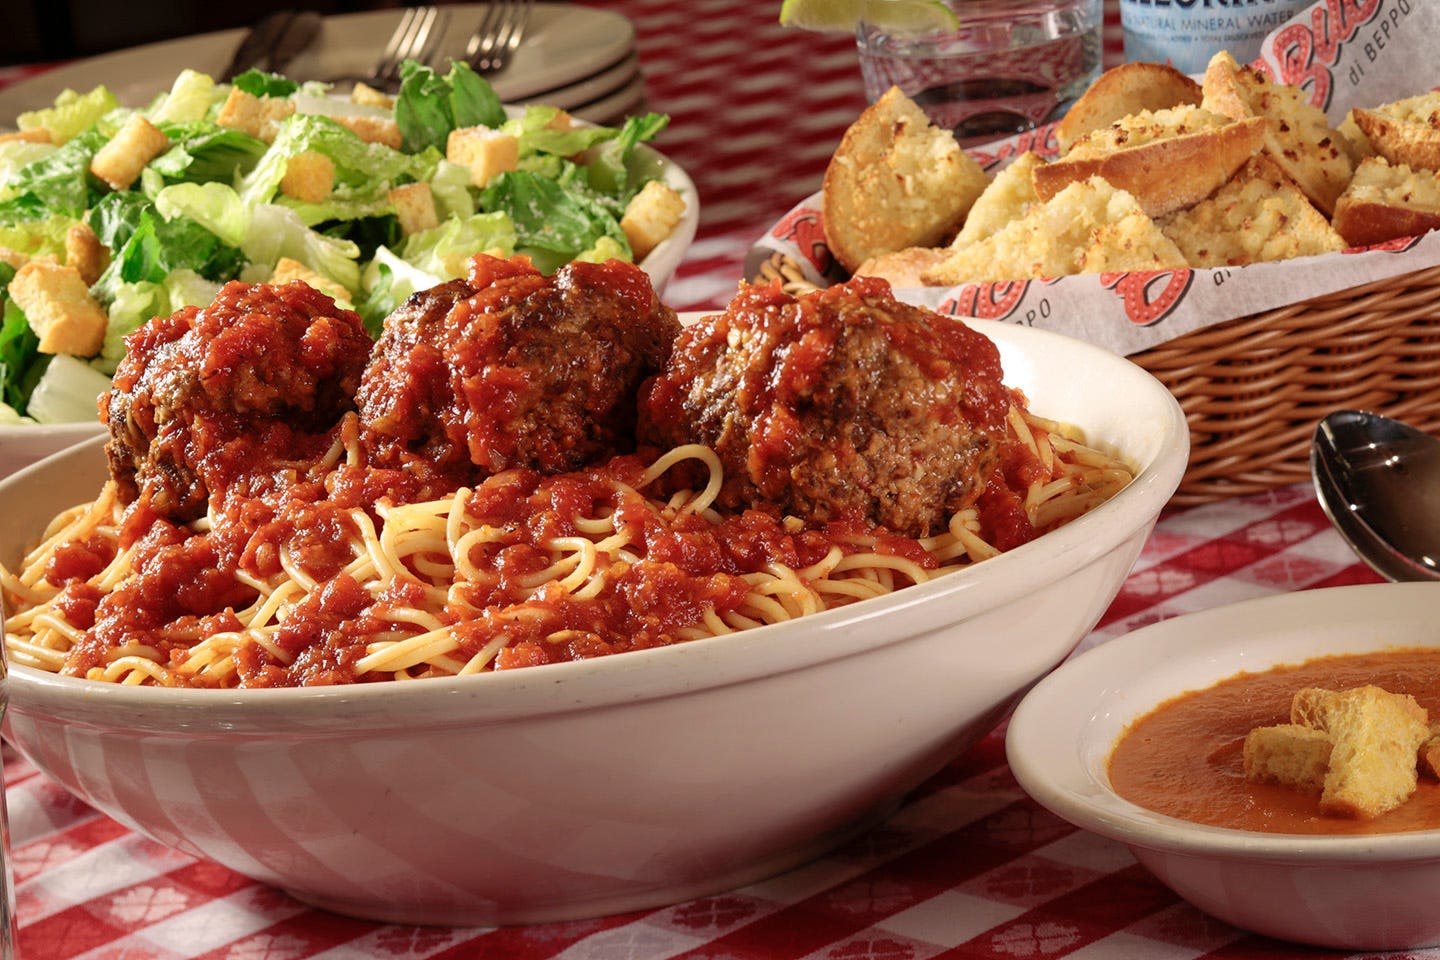 Buca di Beppo locations in Michigan listed as permanently closed